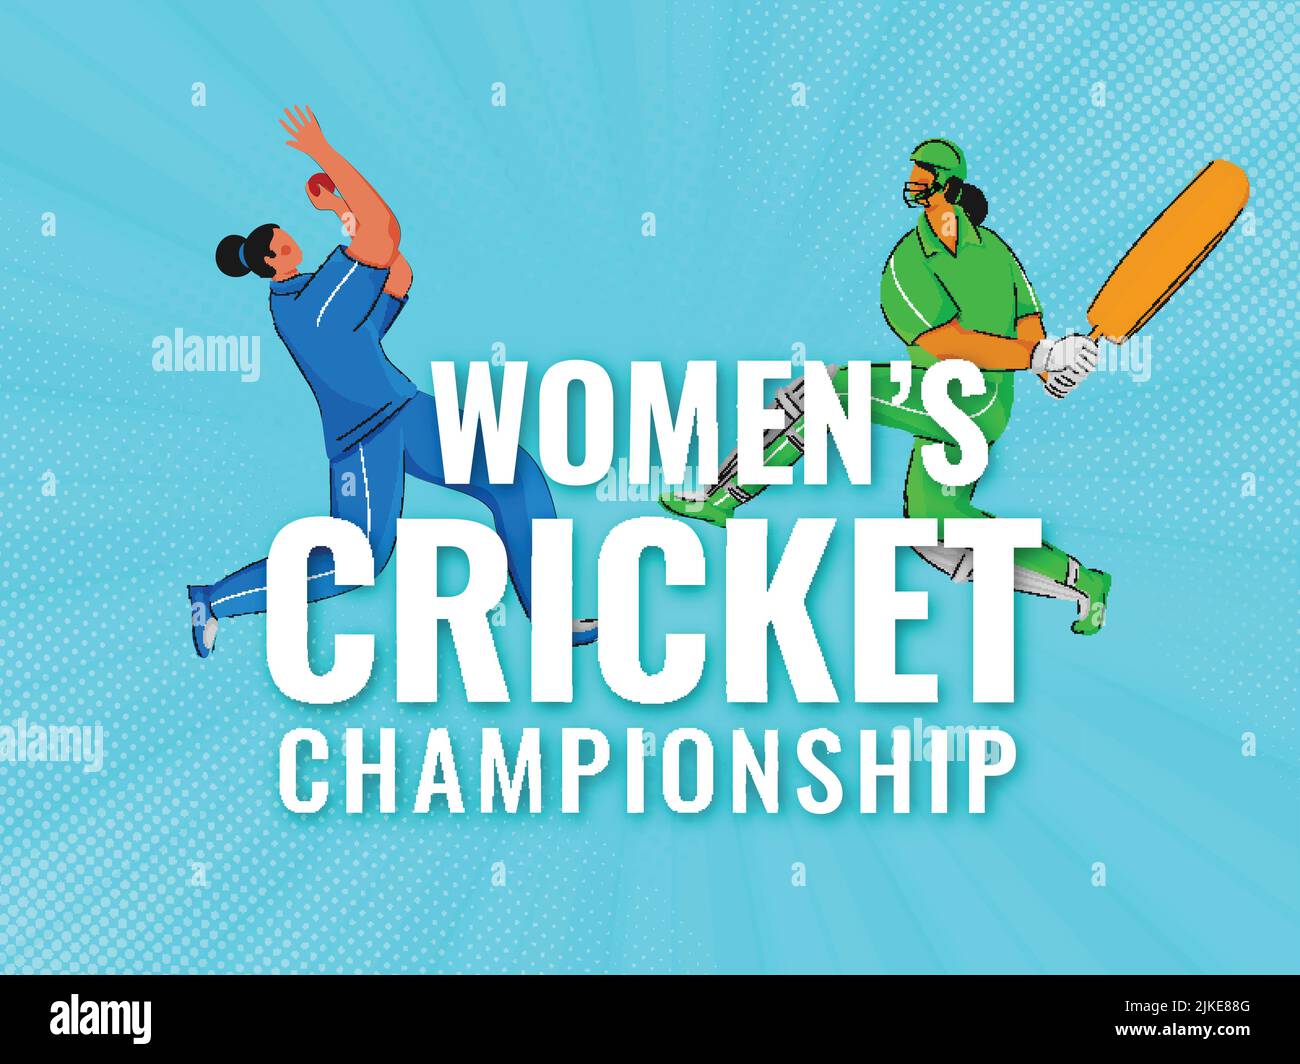 White Women's Cricket Championship Text With Participated Countries Players Of Pakistan VS India On Blue Dotted Rays Background. Stock Vector